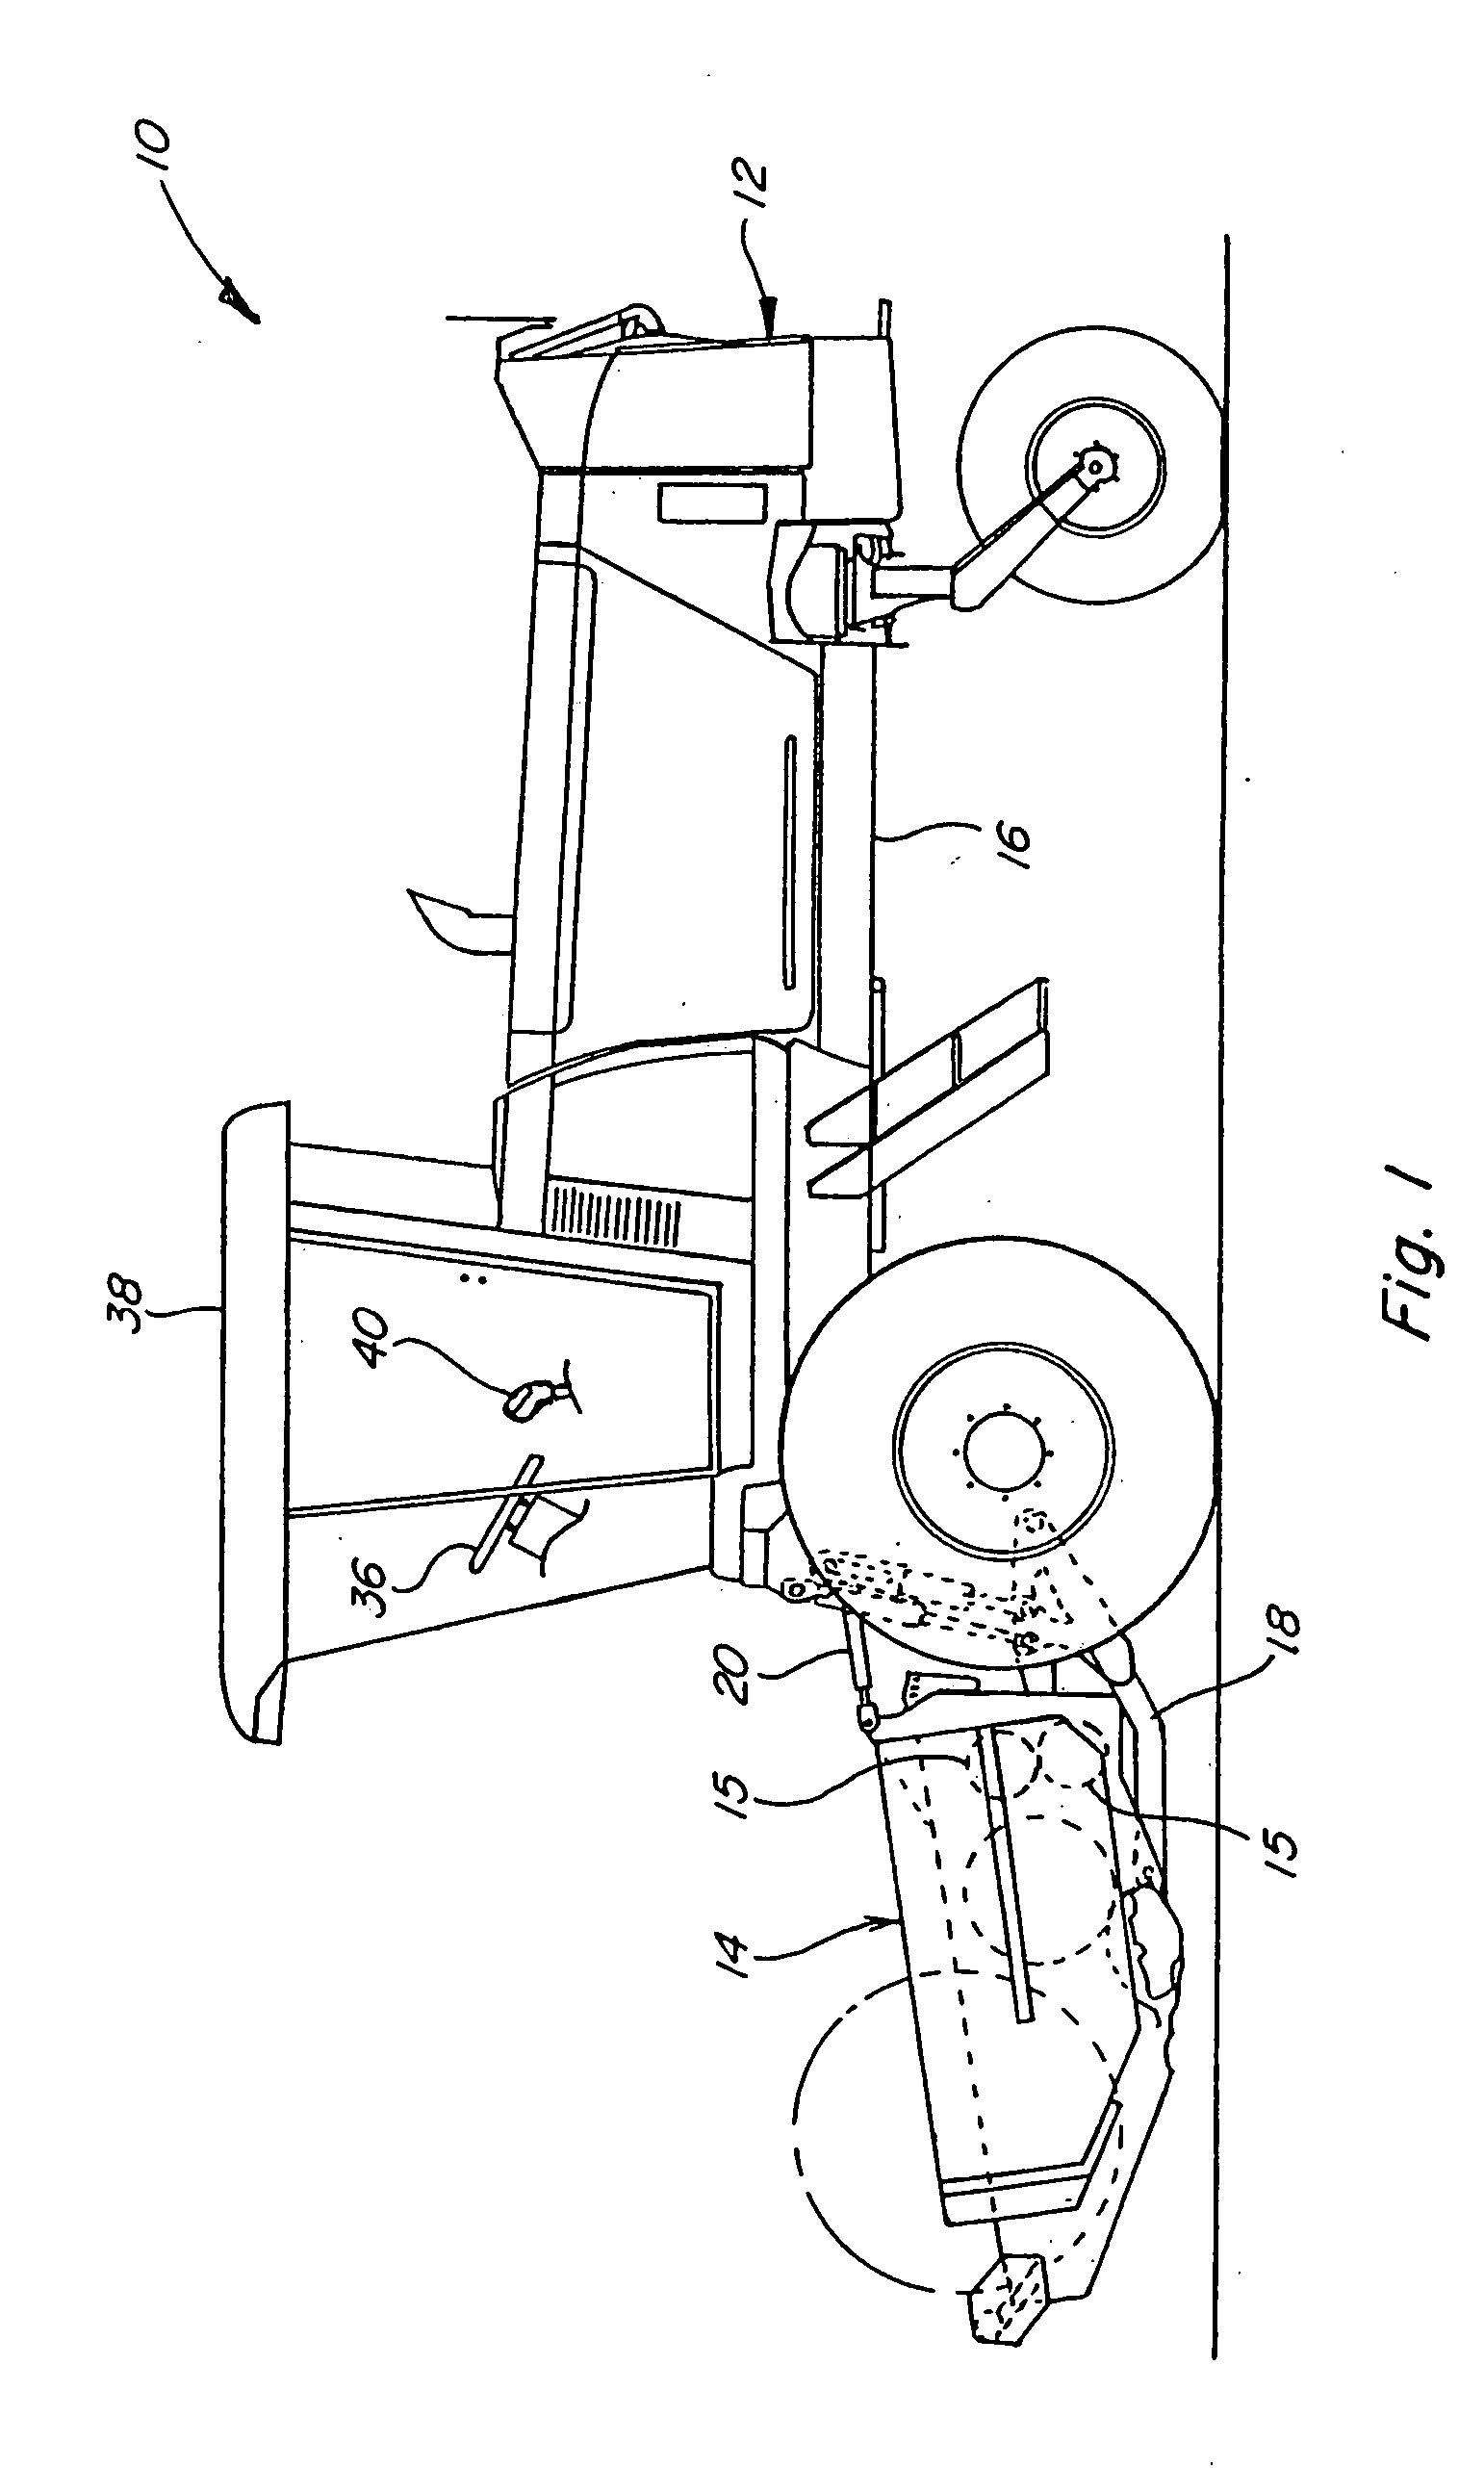 Apparatus and method to vary the sensitivity slope of the FNR control lever of an agricultural windrower